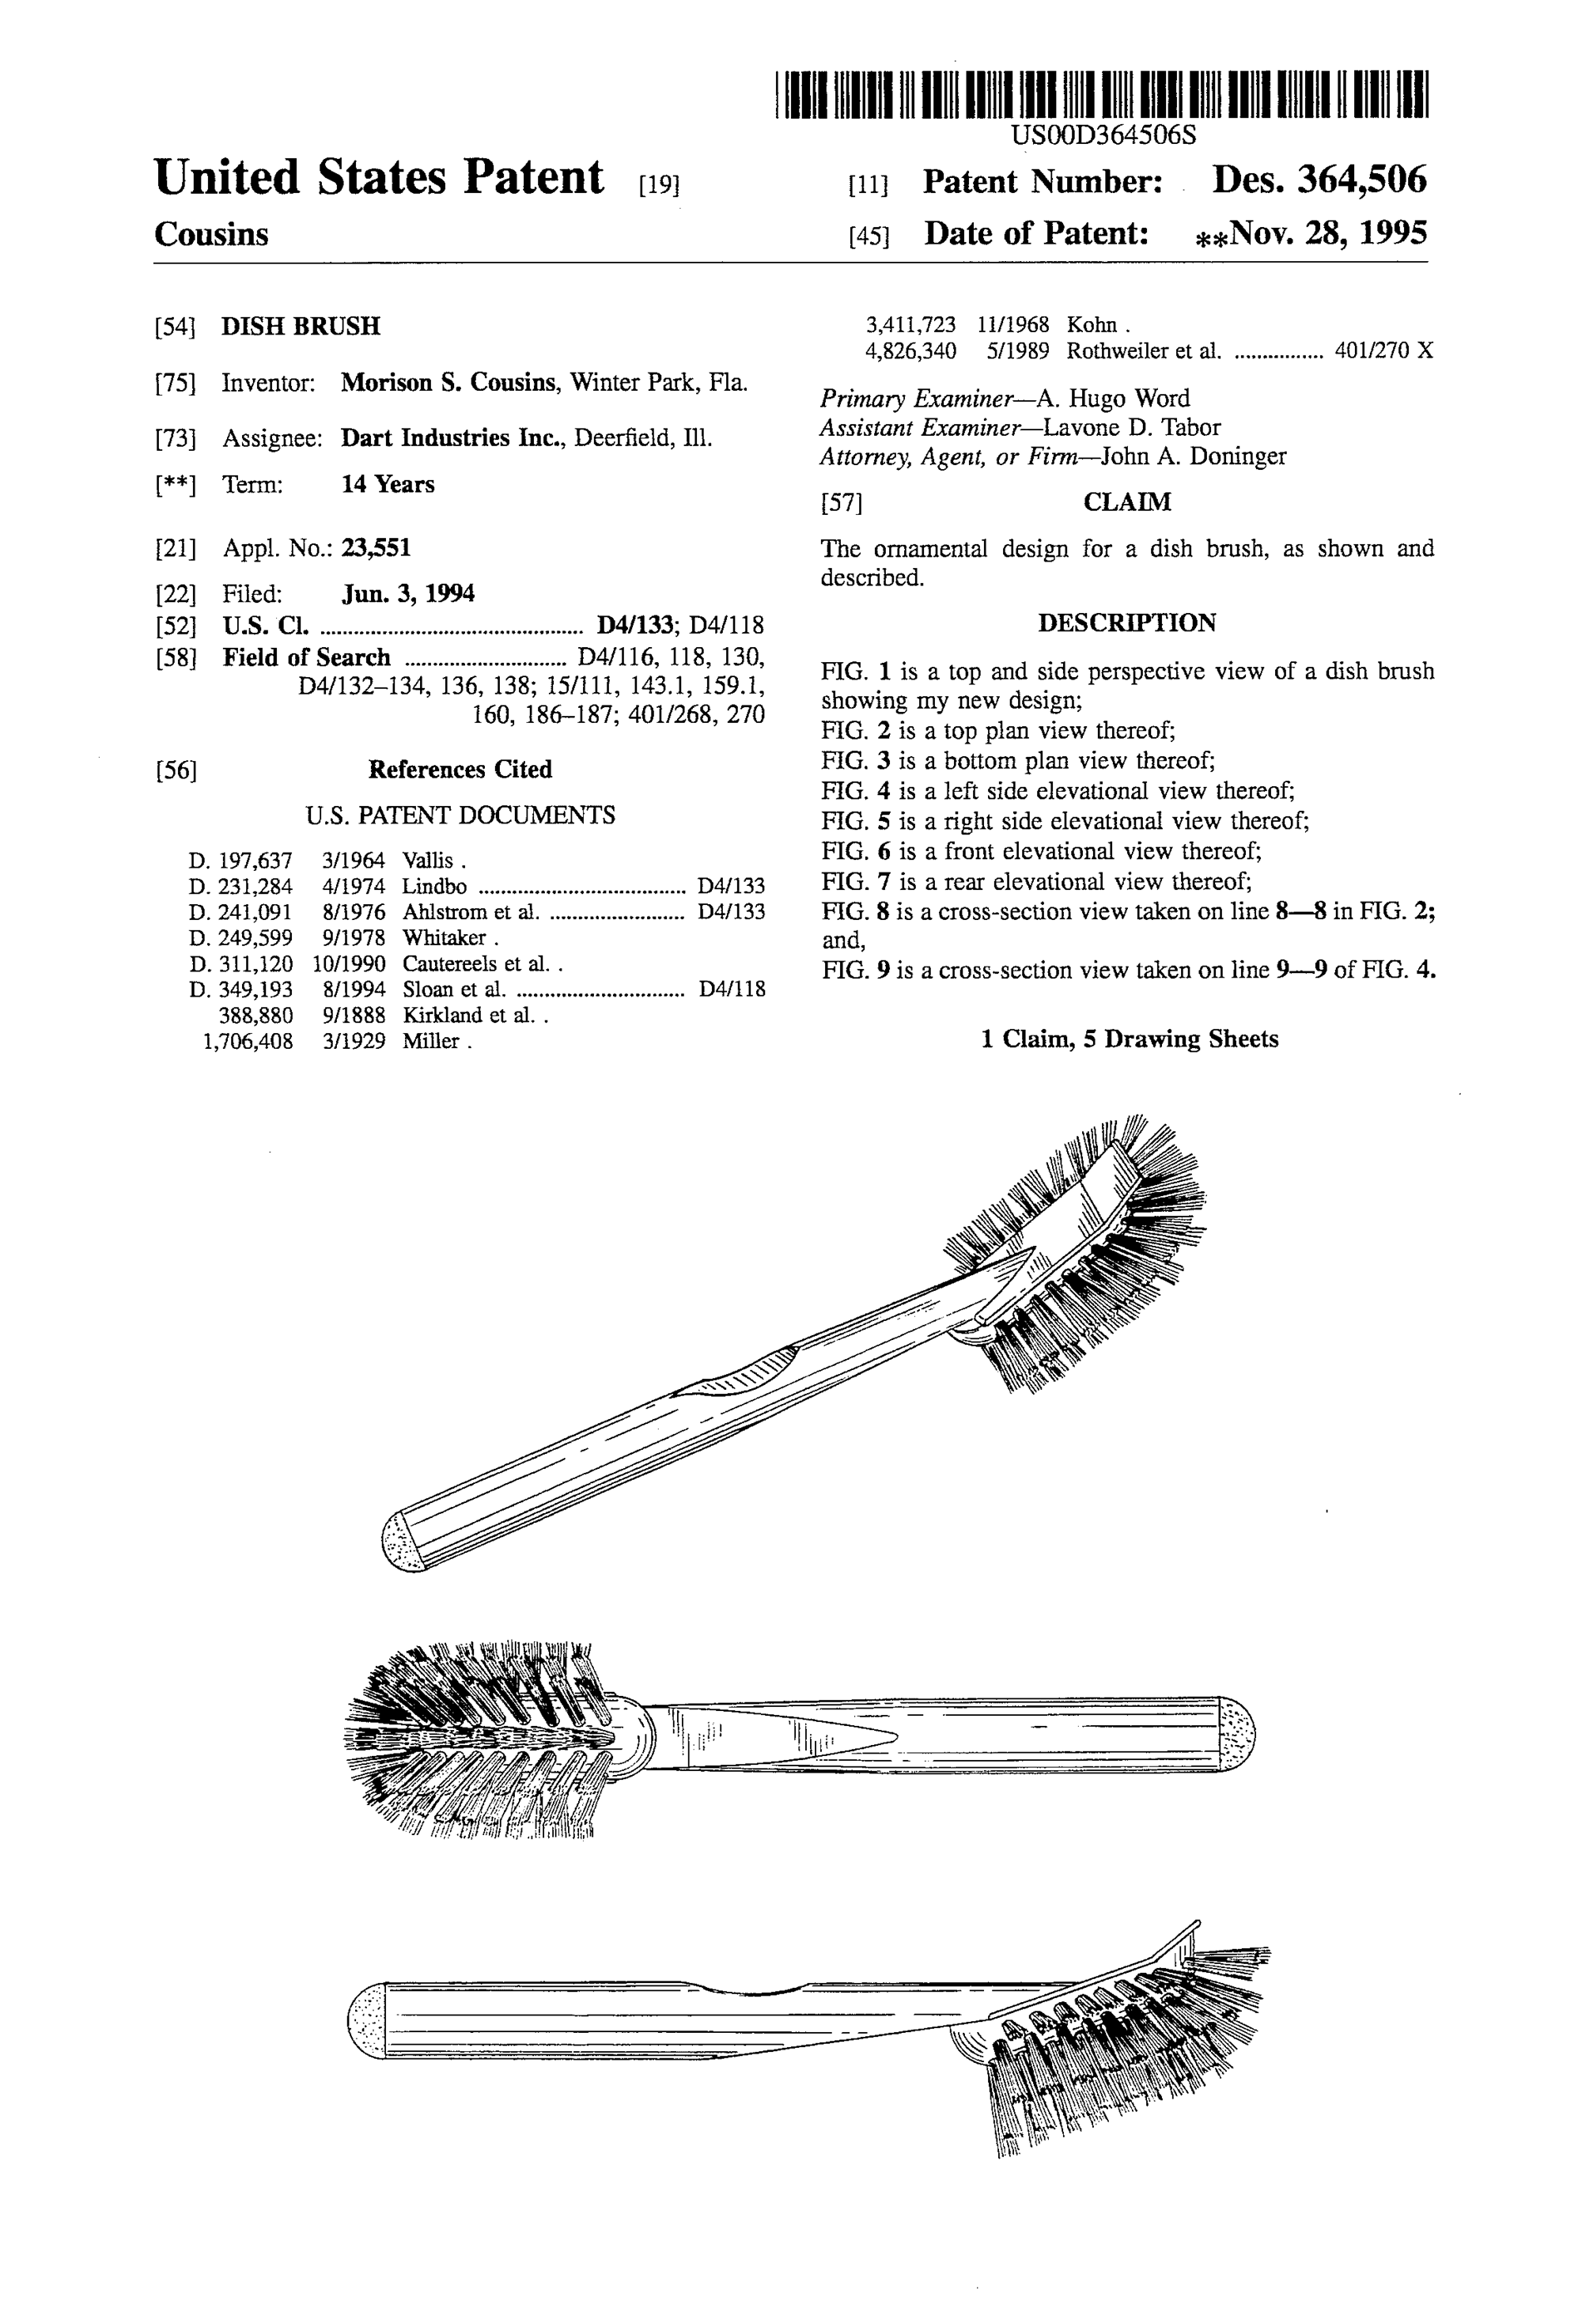 Dish Brush, Morison S. Cousins, for Dart Industries, 1994/1995. Patent Number: USD 364,506, U.S. Patent Office 